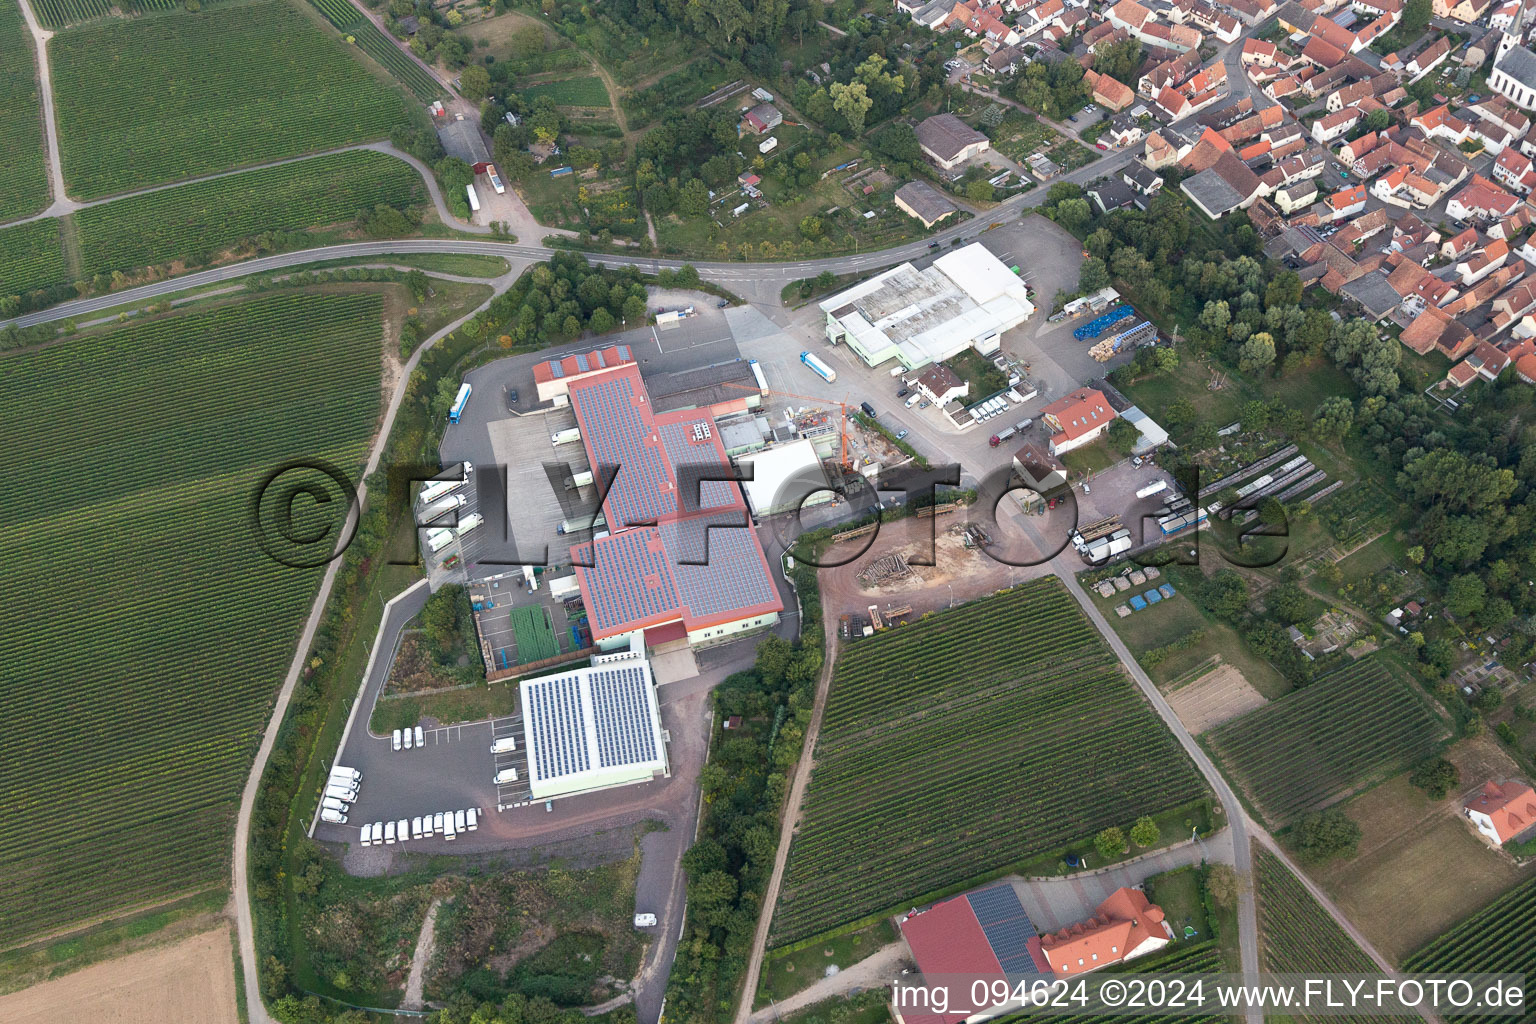 Bird's eye view of Hochstadt in the state Rhineland-Palatinate, Germany